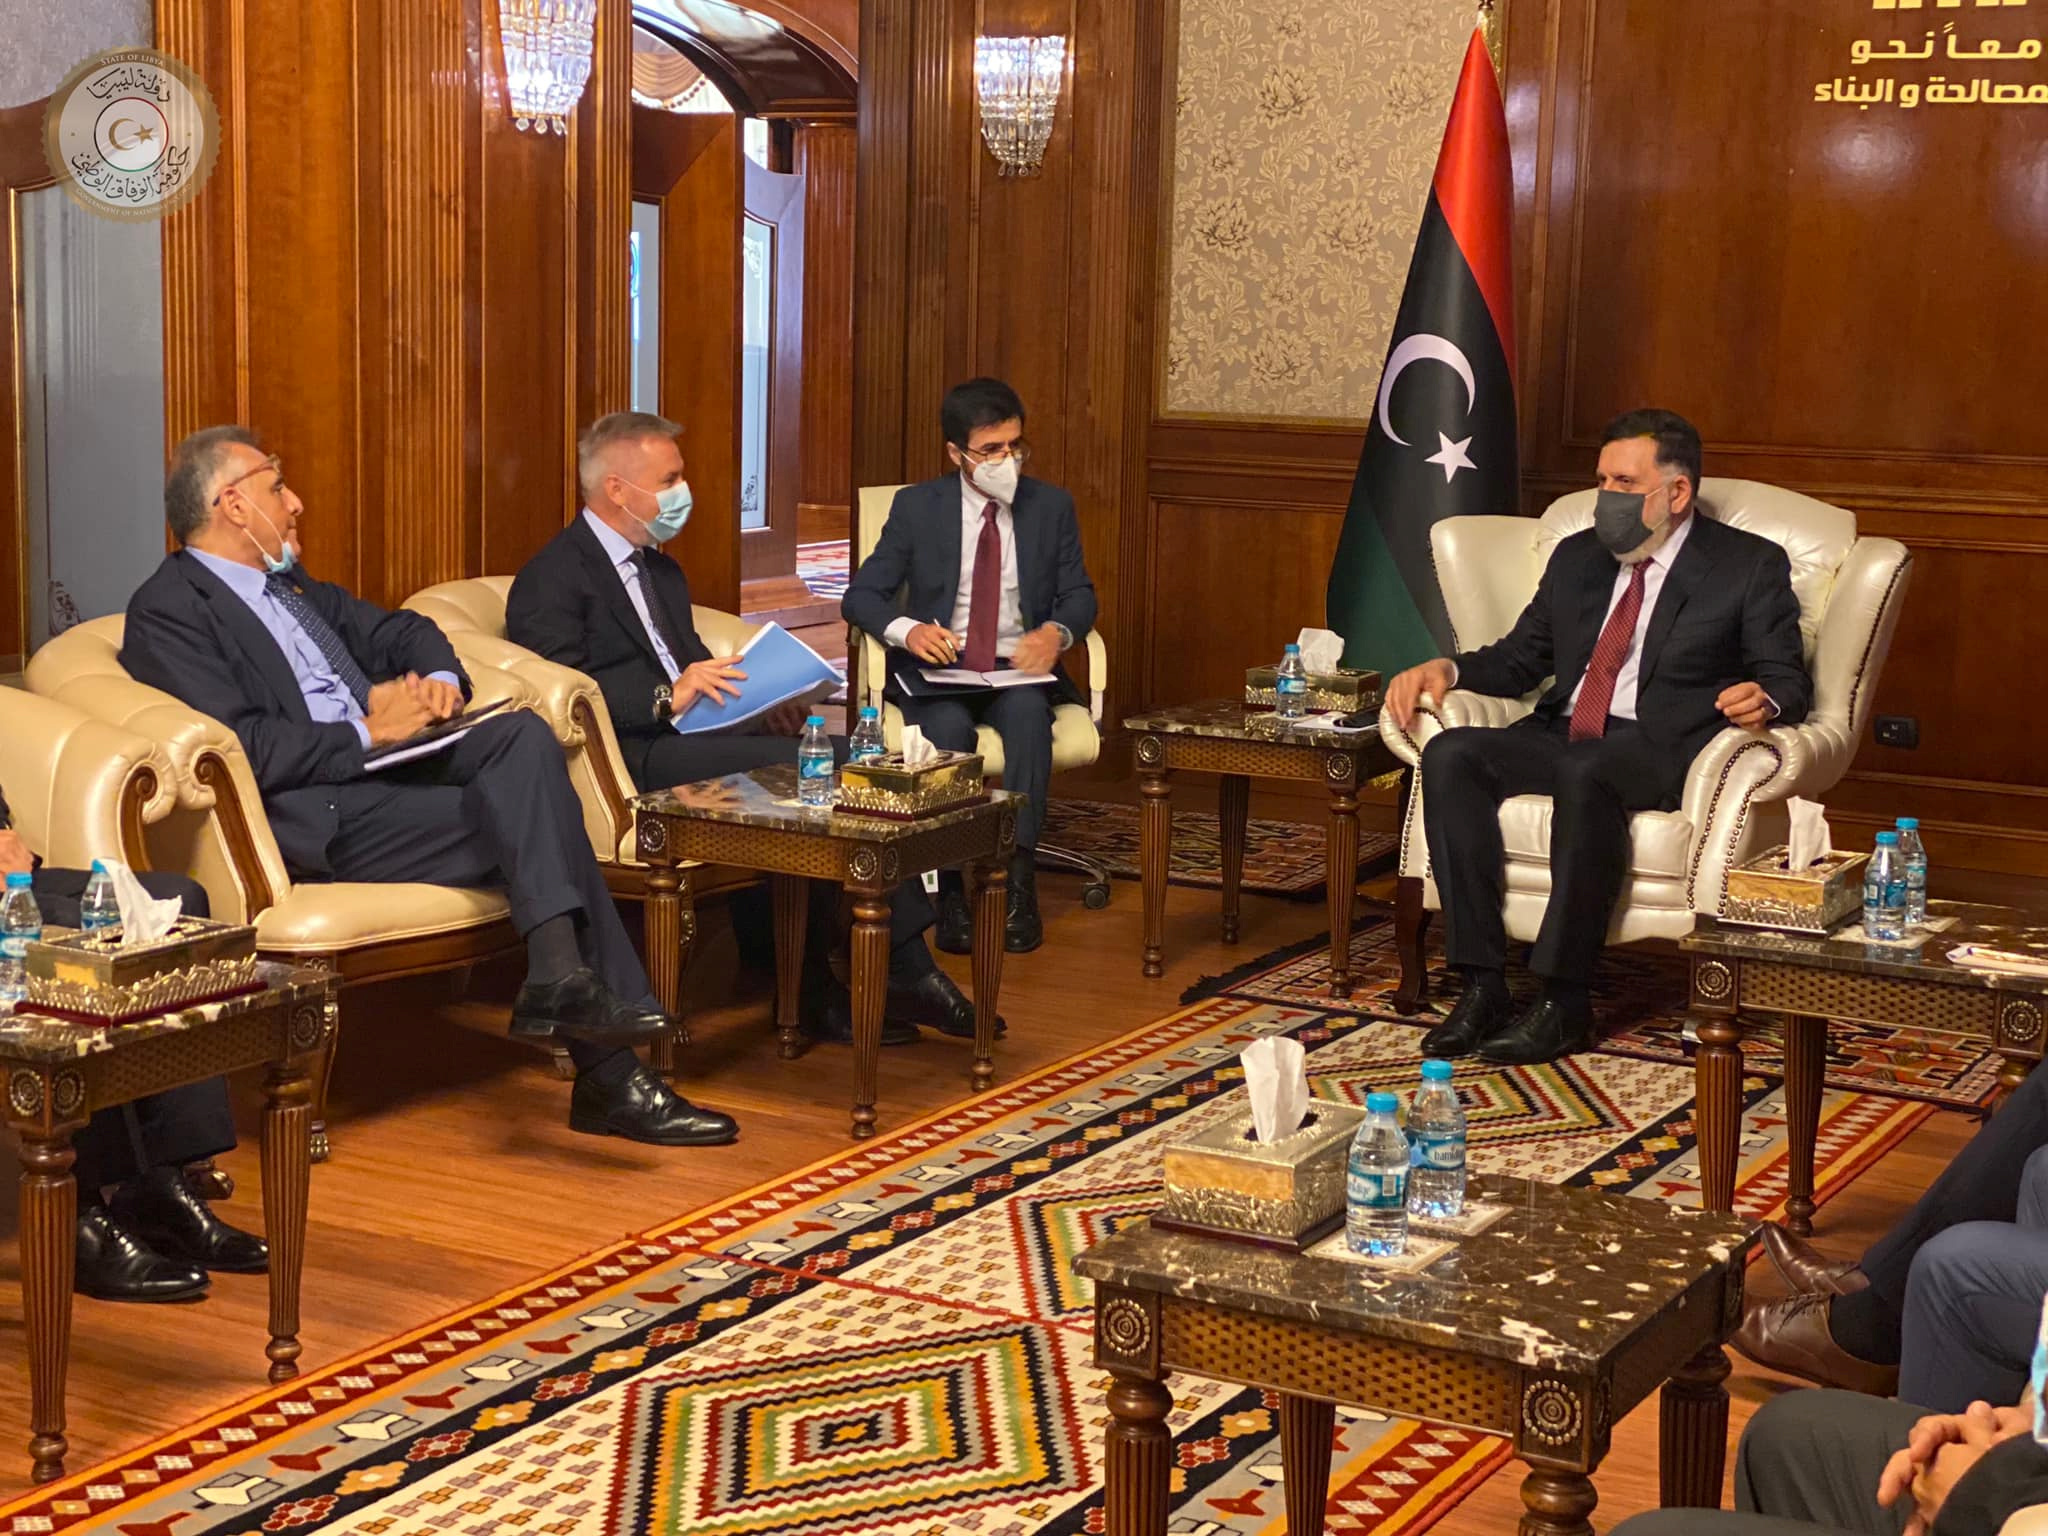 Libya's internationally recognised Prime Minister Fayez al-Sarraj wears a protective mask as he meets with Italian Defence Minister Lorenzo Guerini in Tripoli, Libya August 5, 2020. The Media Office of the Prime Minister/Handout via REUTERS ATTENTION EDITORS - THIS IMAGE WAS PROVIDED BY A THIRD PARTY.